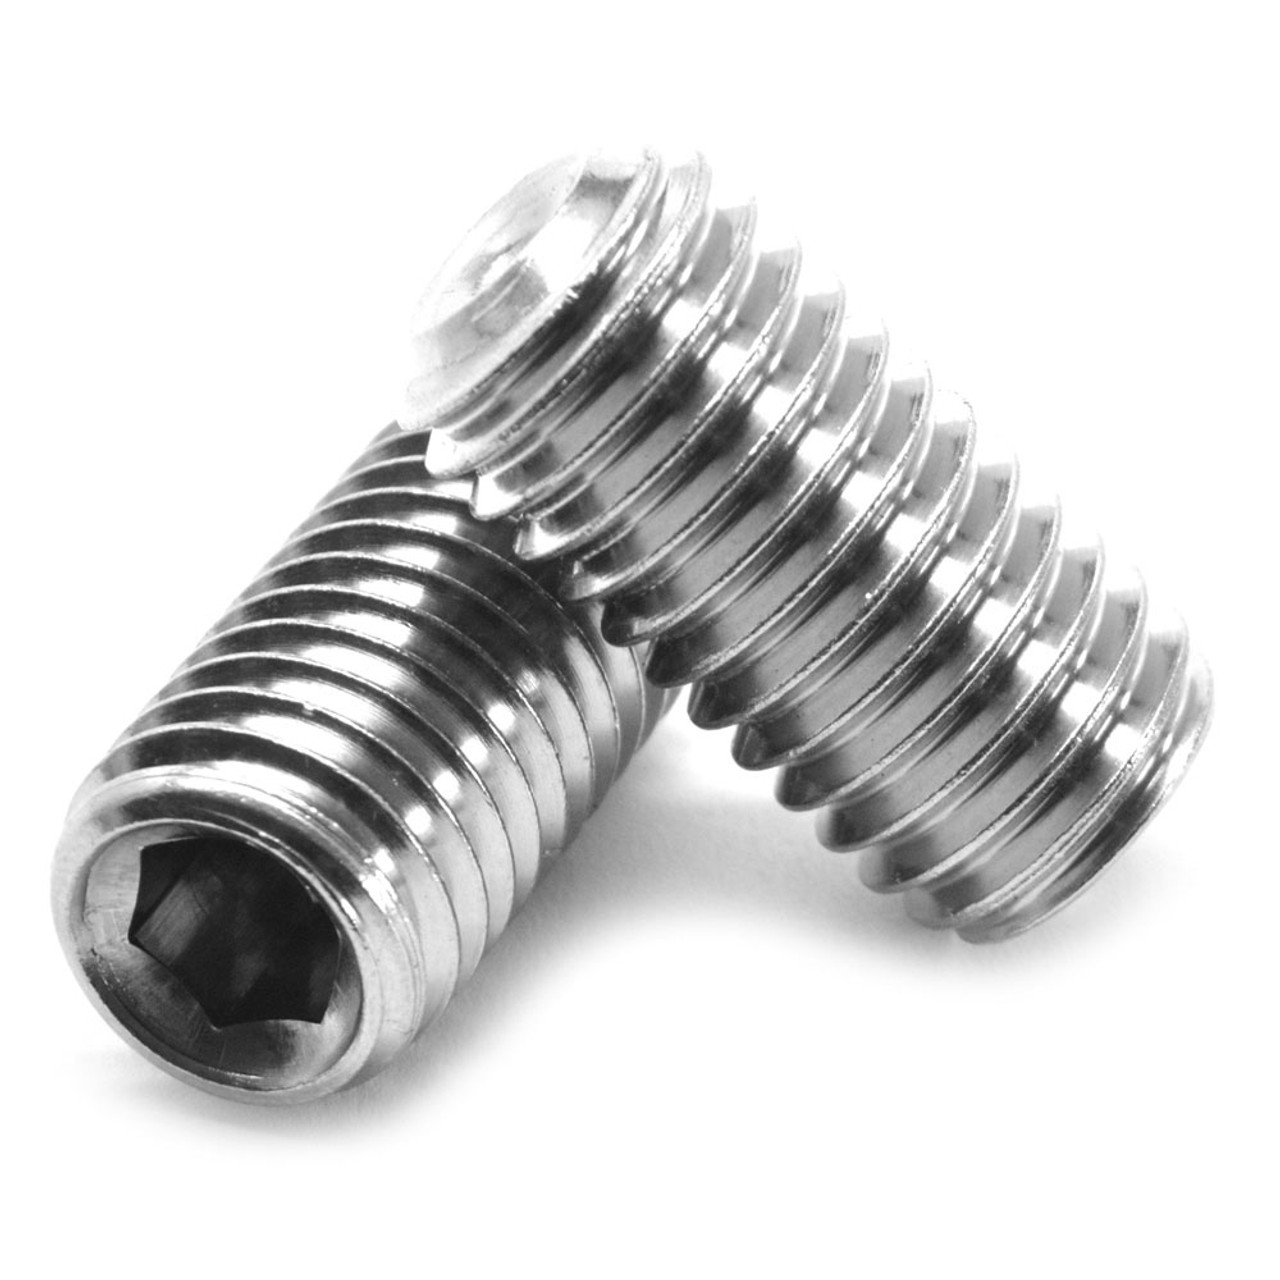 1/4"-20 x 5/16" Coarse Thread Socket Set Screw Cup Point Stainless Steel 316